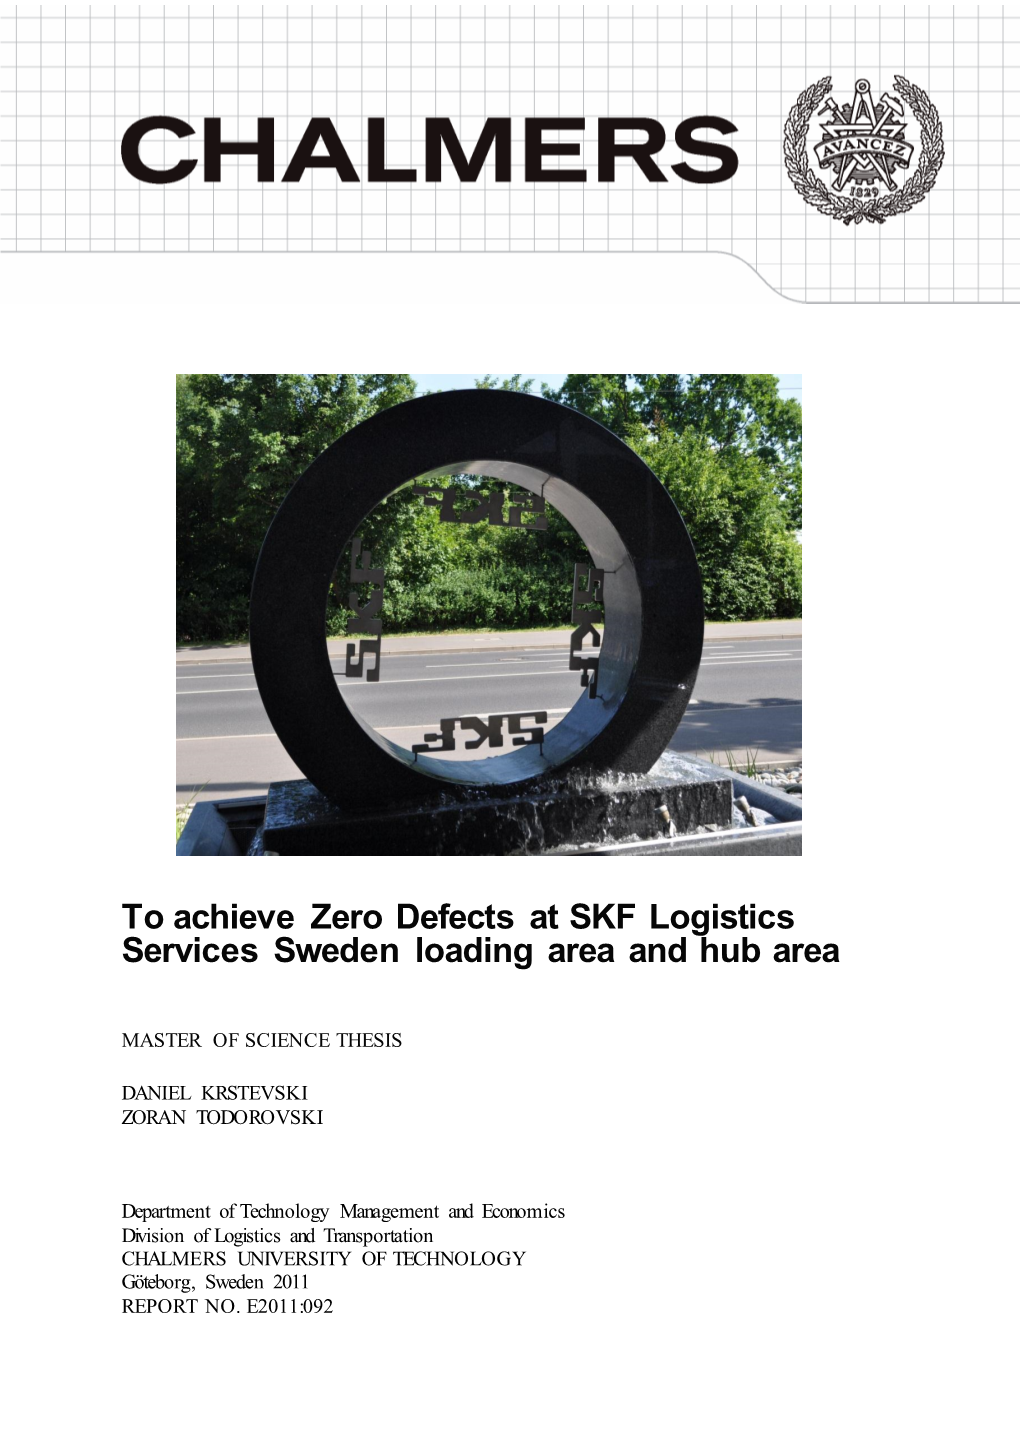 To Achieve Zero Defects at SKF Logistics Services Sweden Loading Area and Hub Area